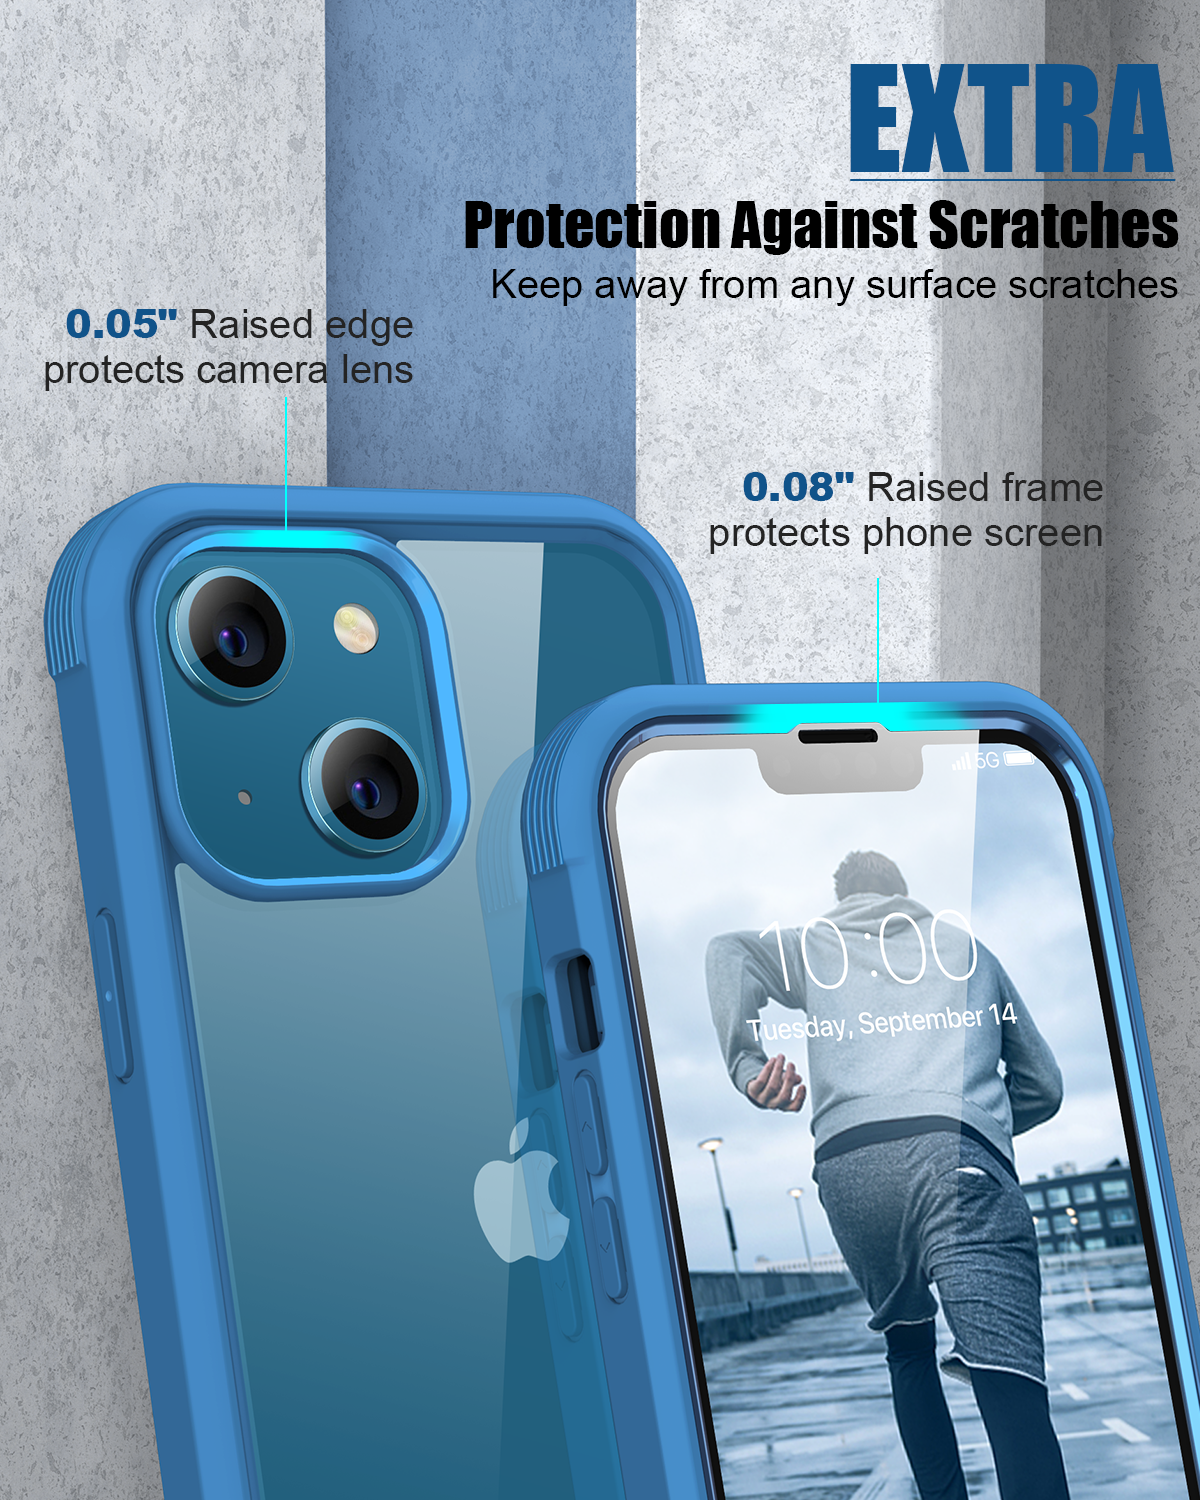 Diamond Series│Glass Case for iPhone 13